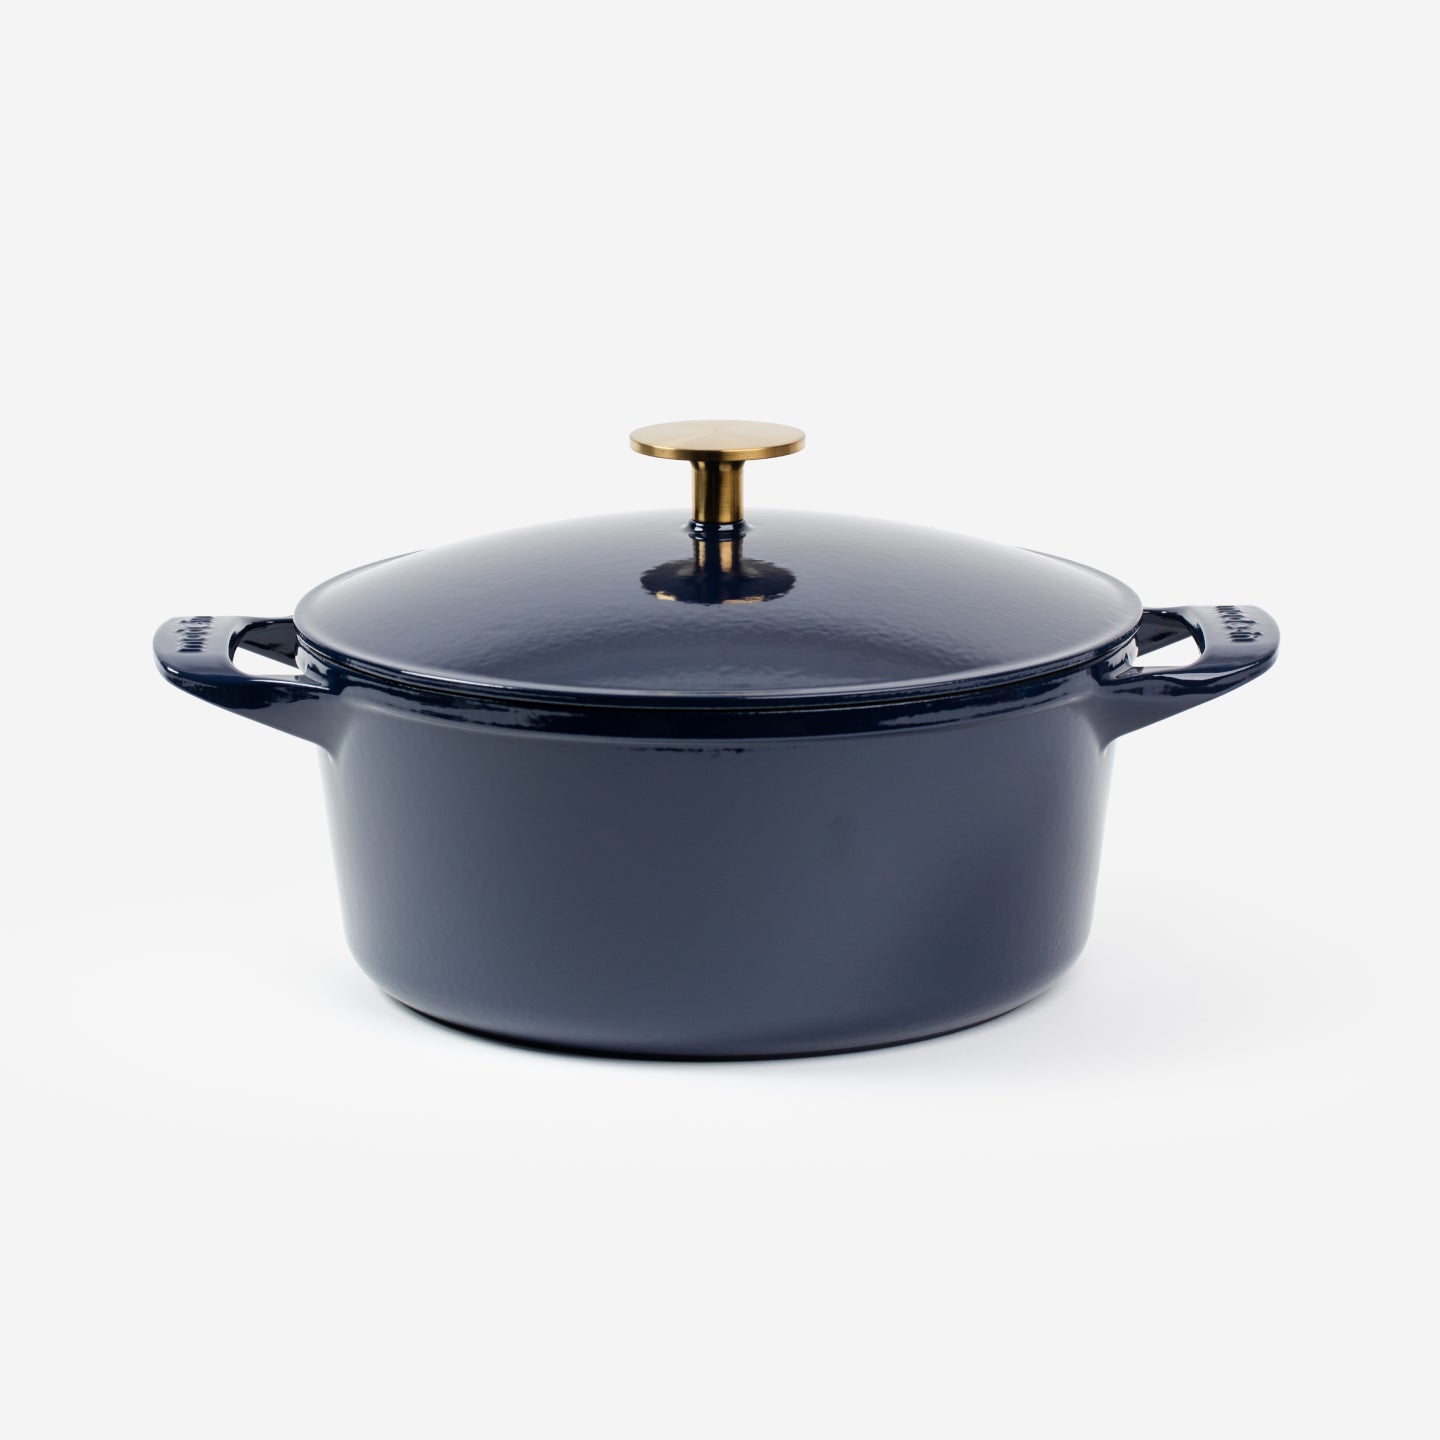 MadeIn Enameled Cast Iron Dutch Oven | 5.5 Quart | Made In